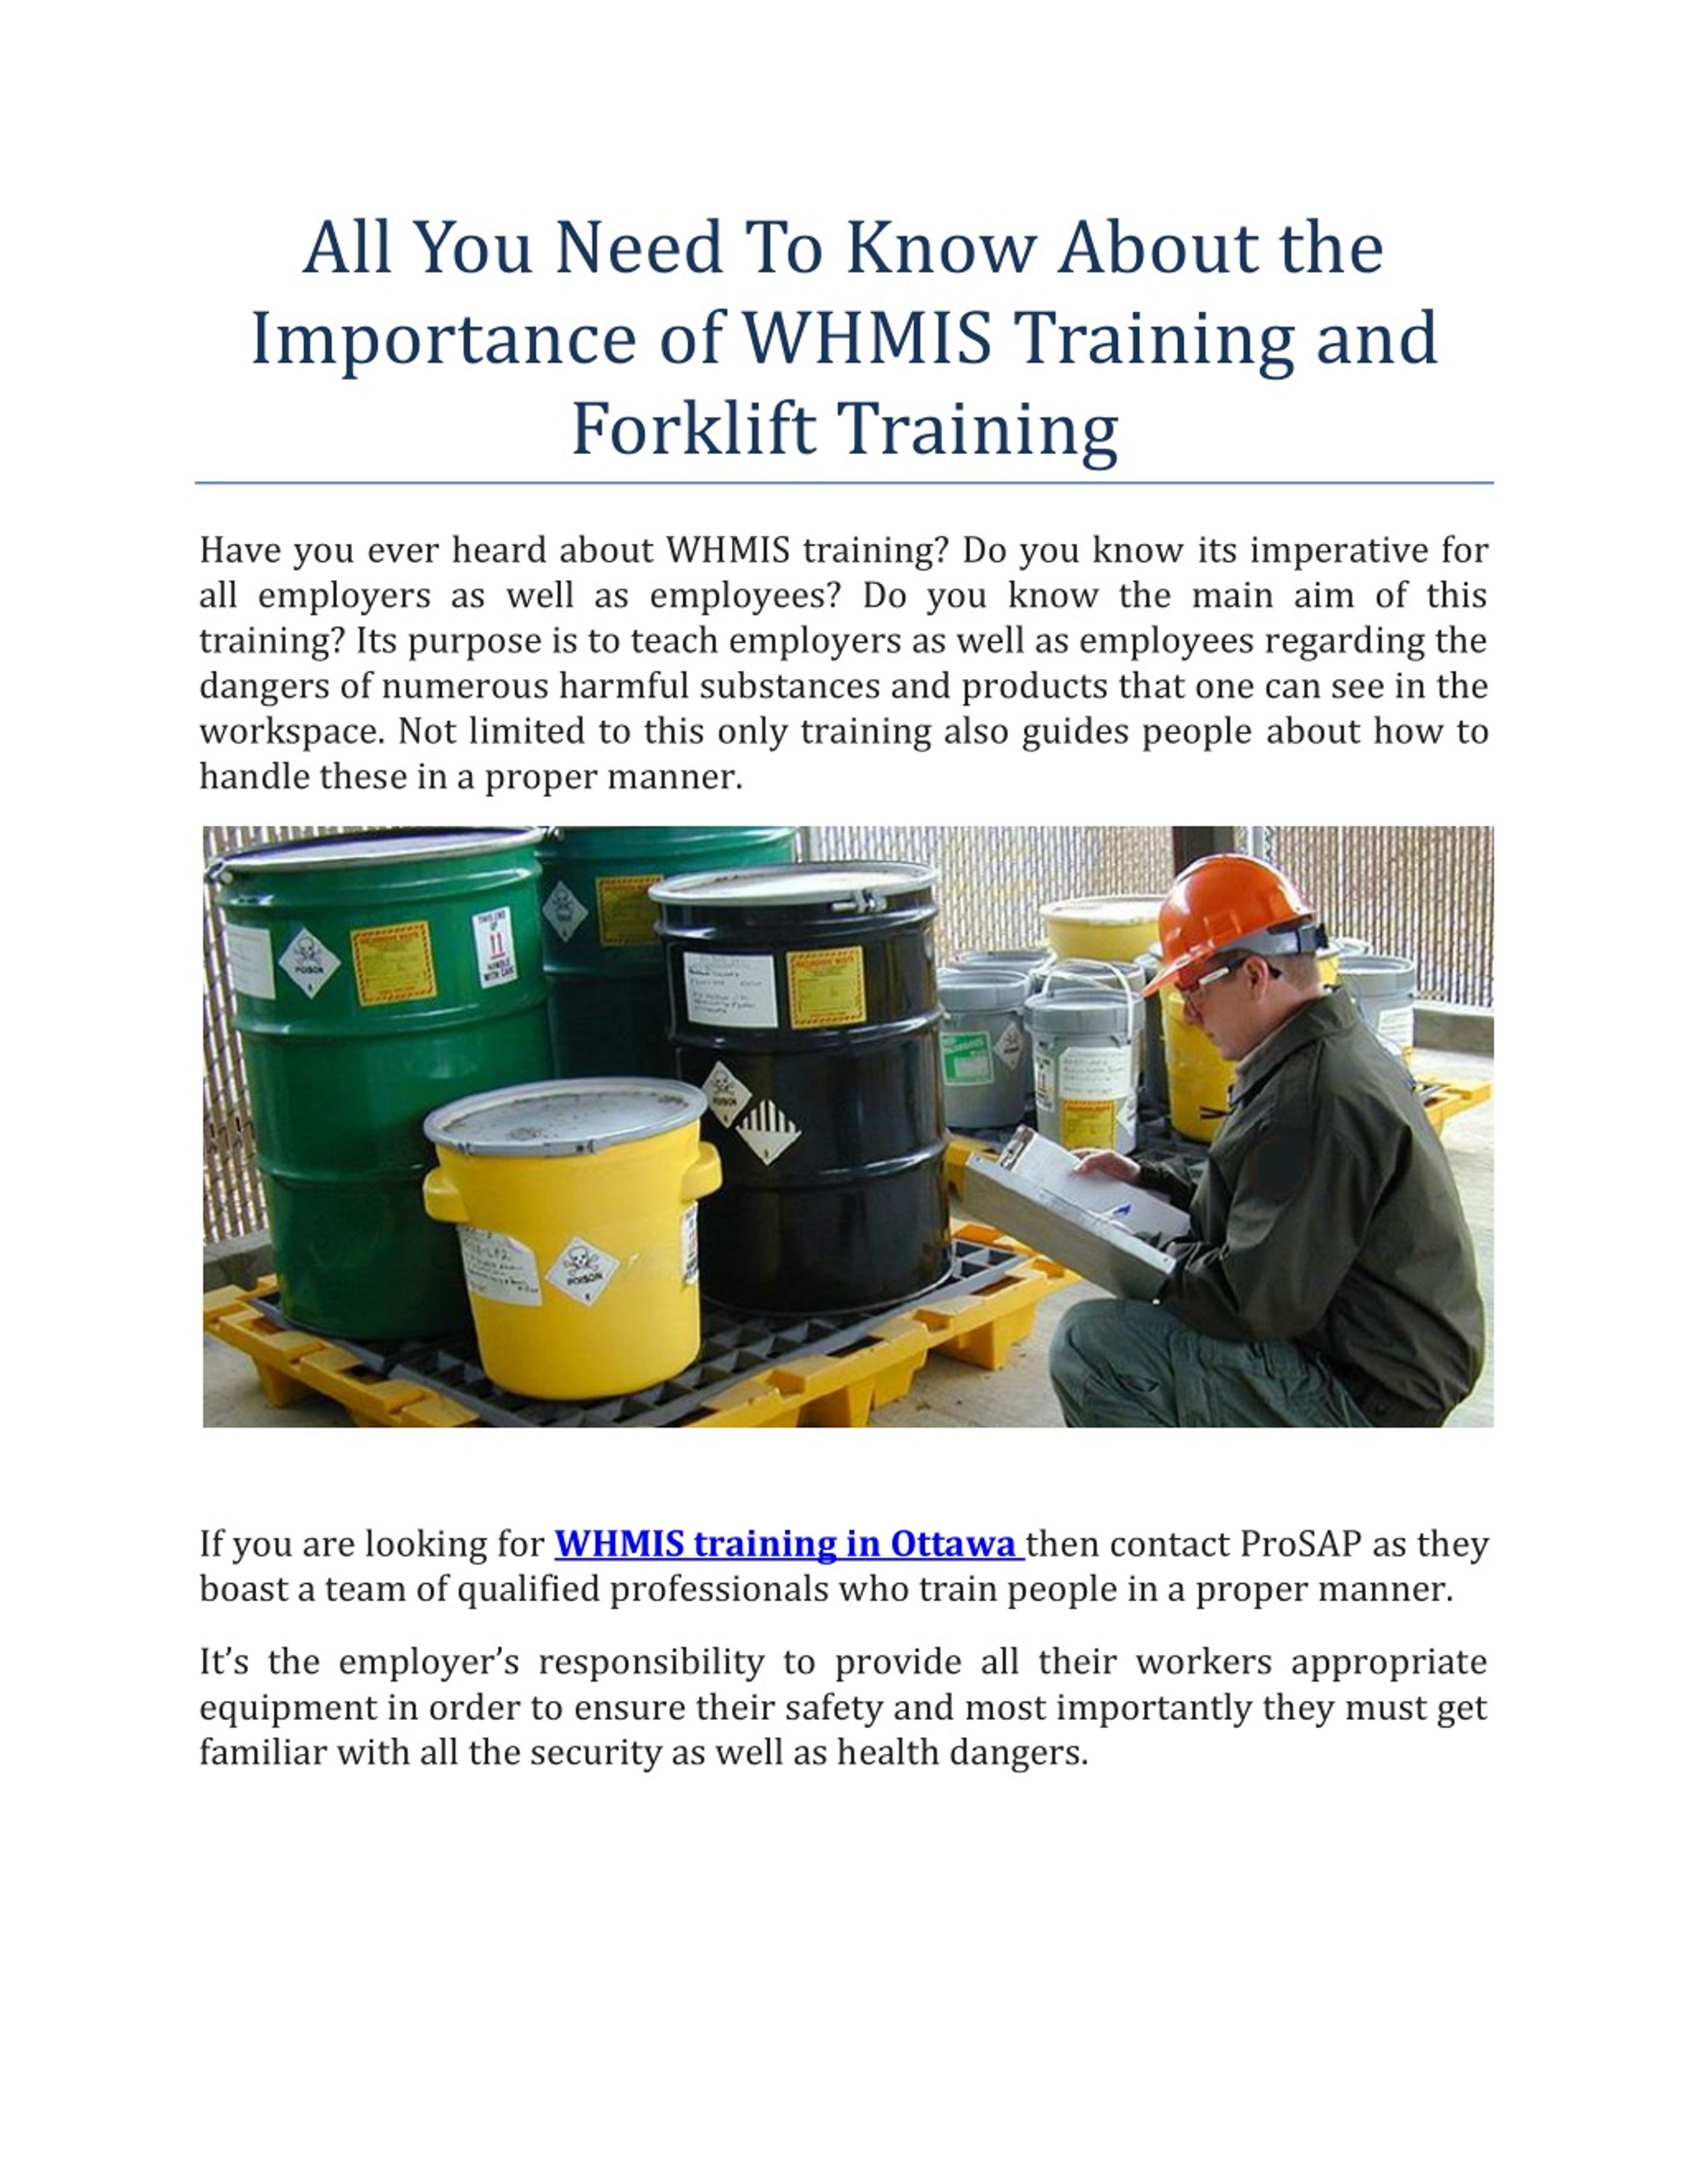 PPT - All about WHMIS Training and Forklift Training PowerPoint ...